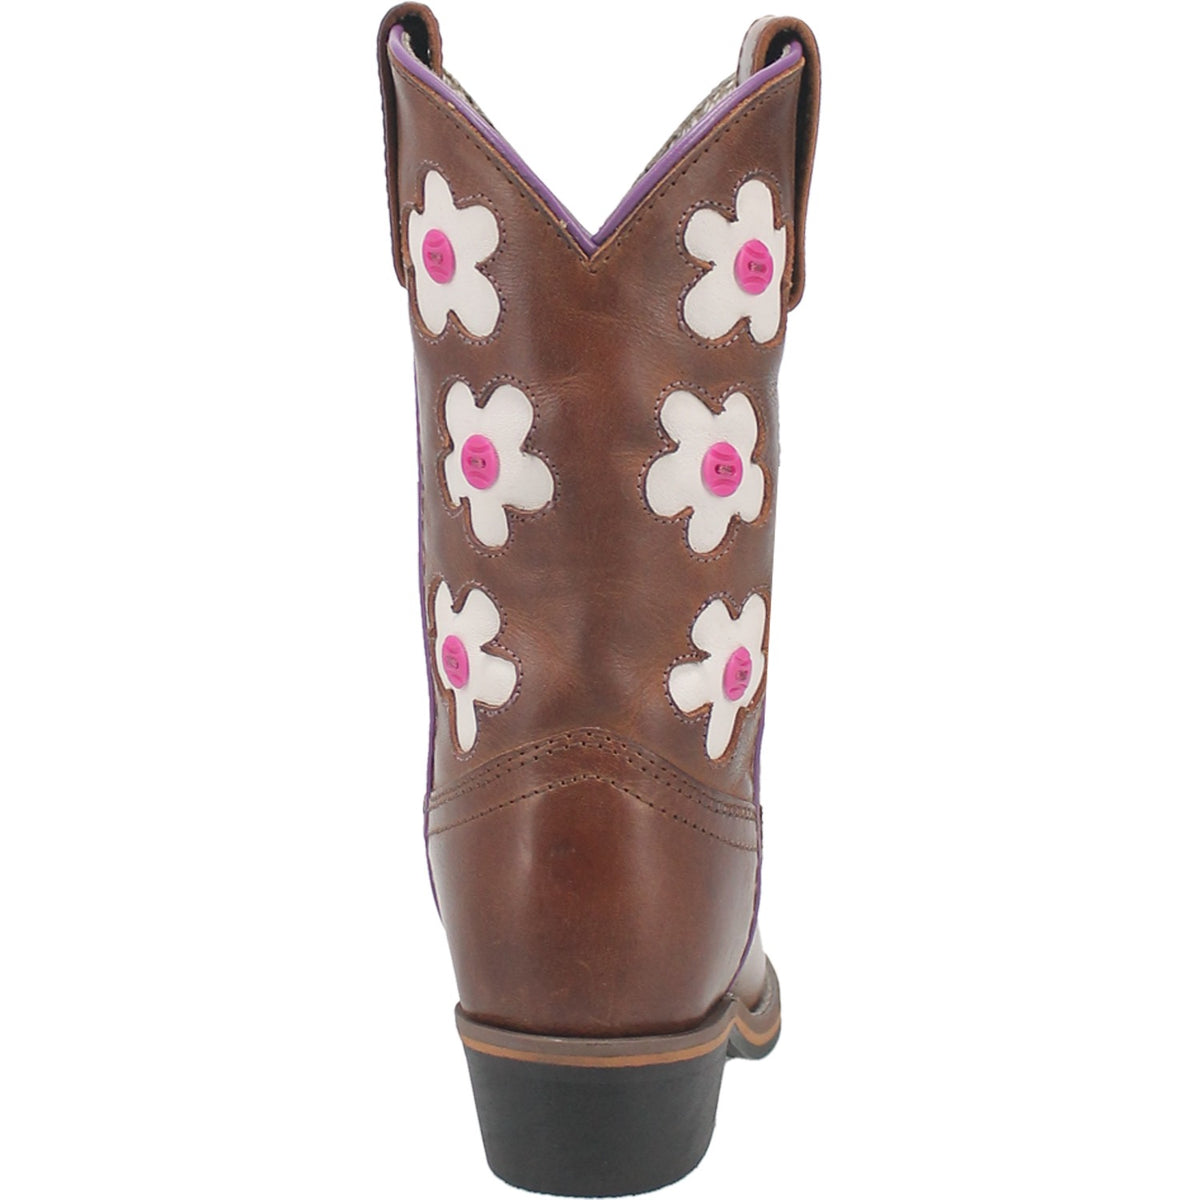 GISELLE COLOR CHANGING LEATHER CHILDREN'S BOOT Cover